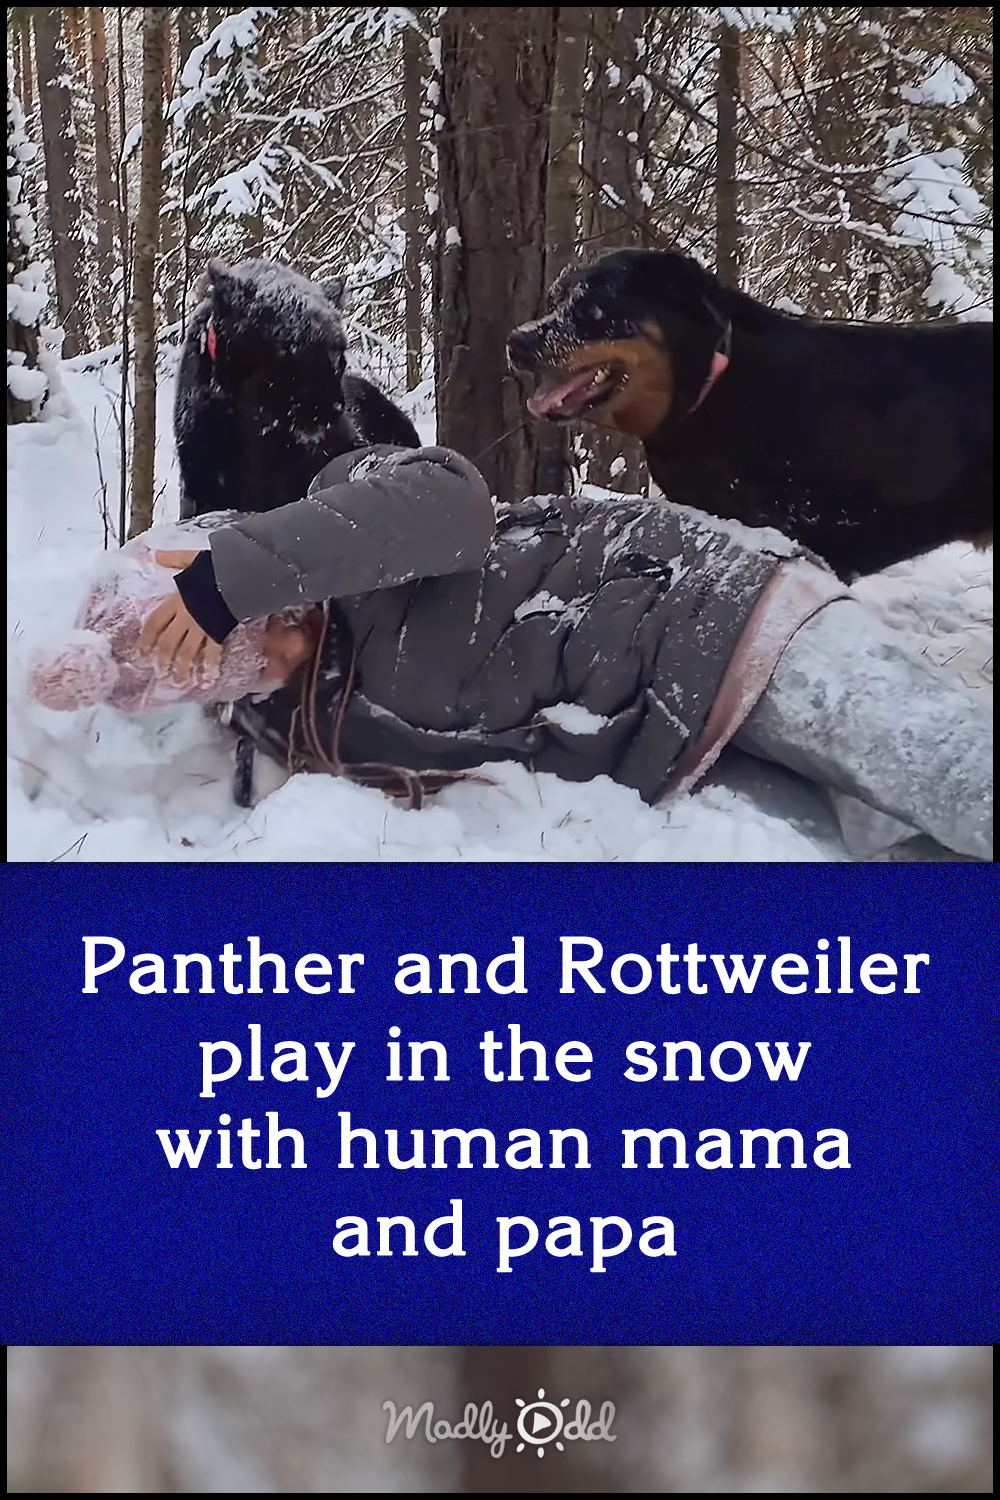 Panther and Rottweiler play in the snow with human mama and papa